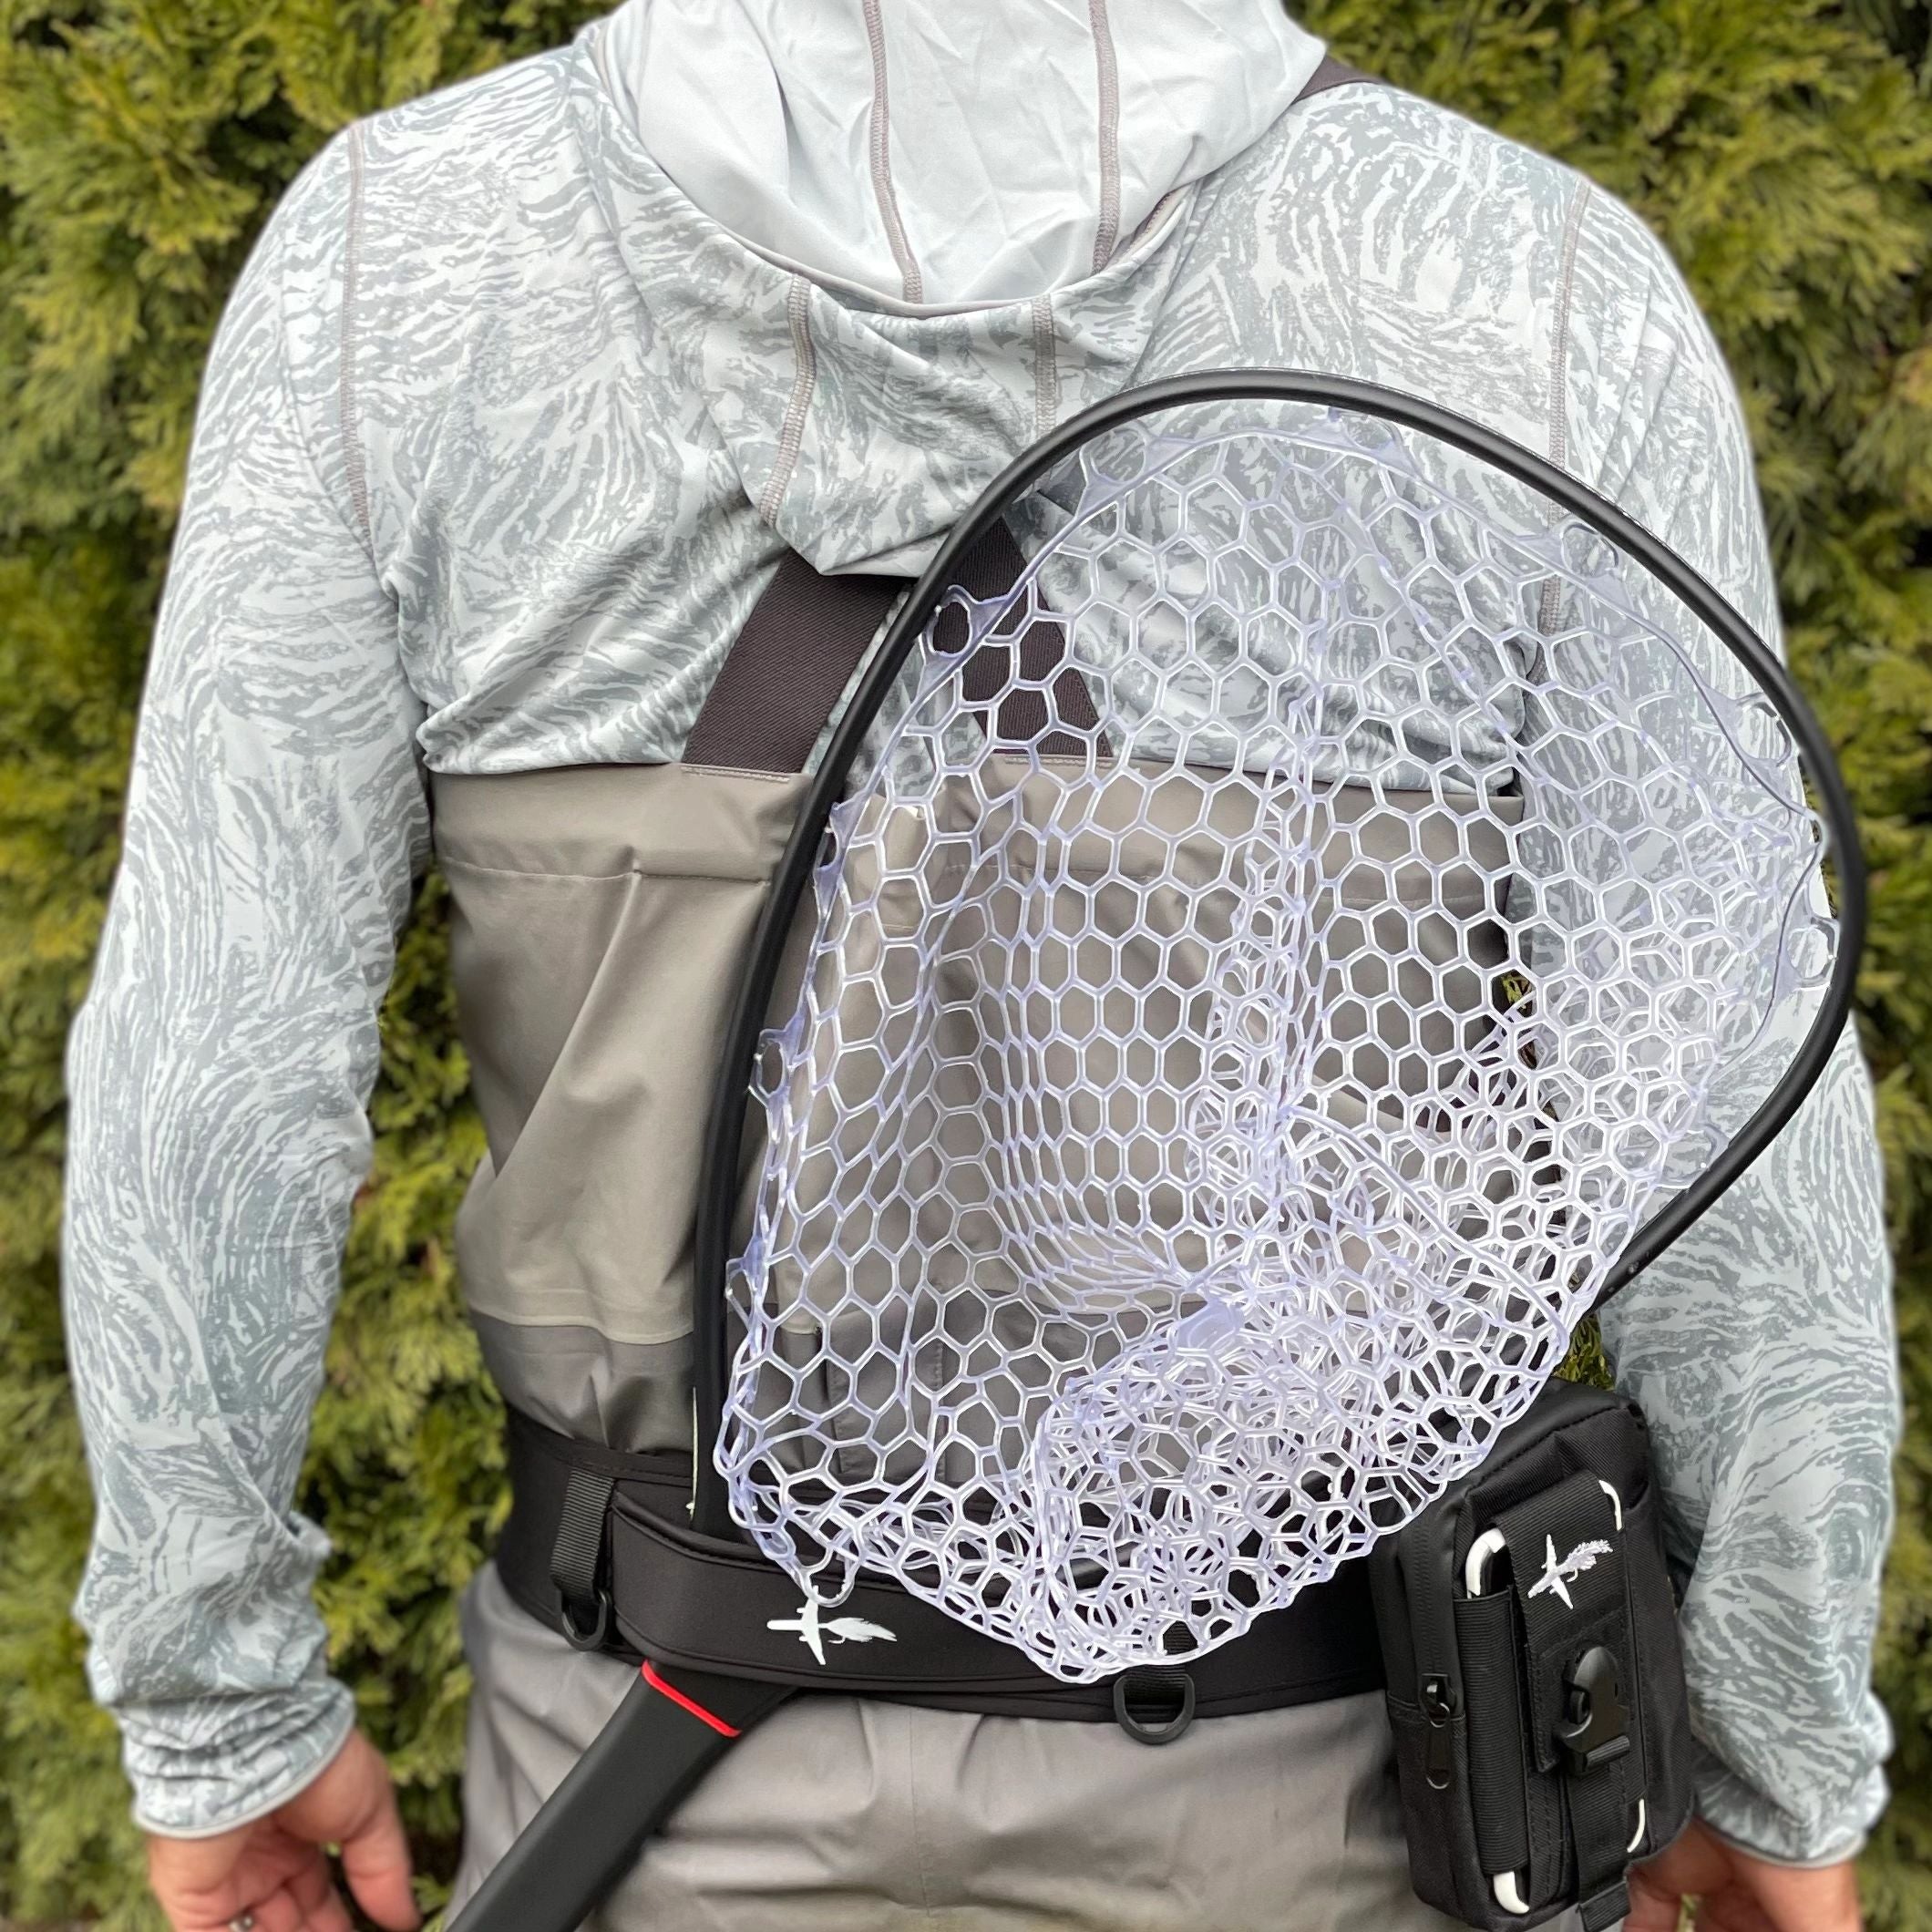 FULL CARBON FLY FISHING NET SYSTEMS | COMES WITH WADING BELT & MAGNET CONNECTOR